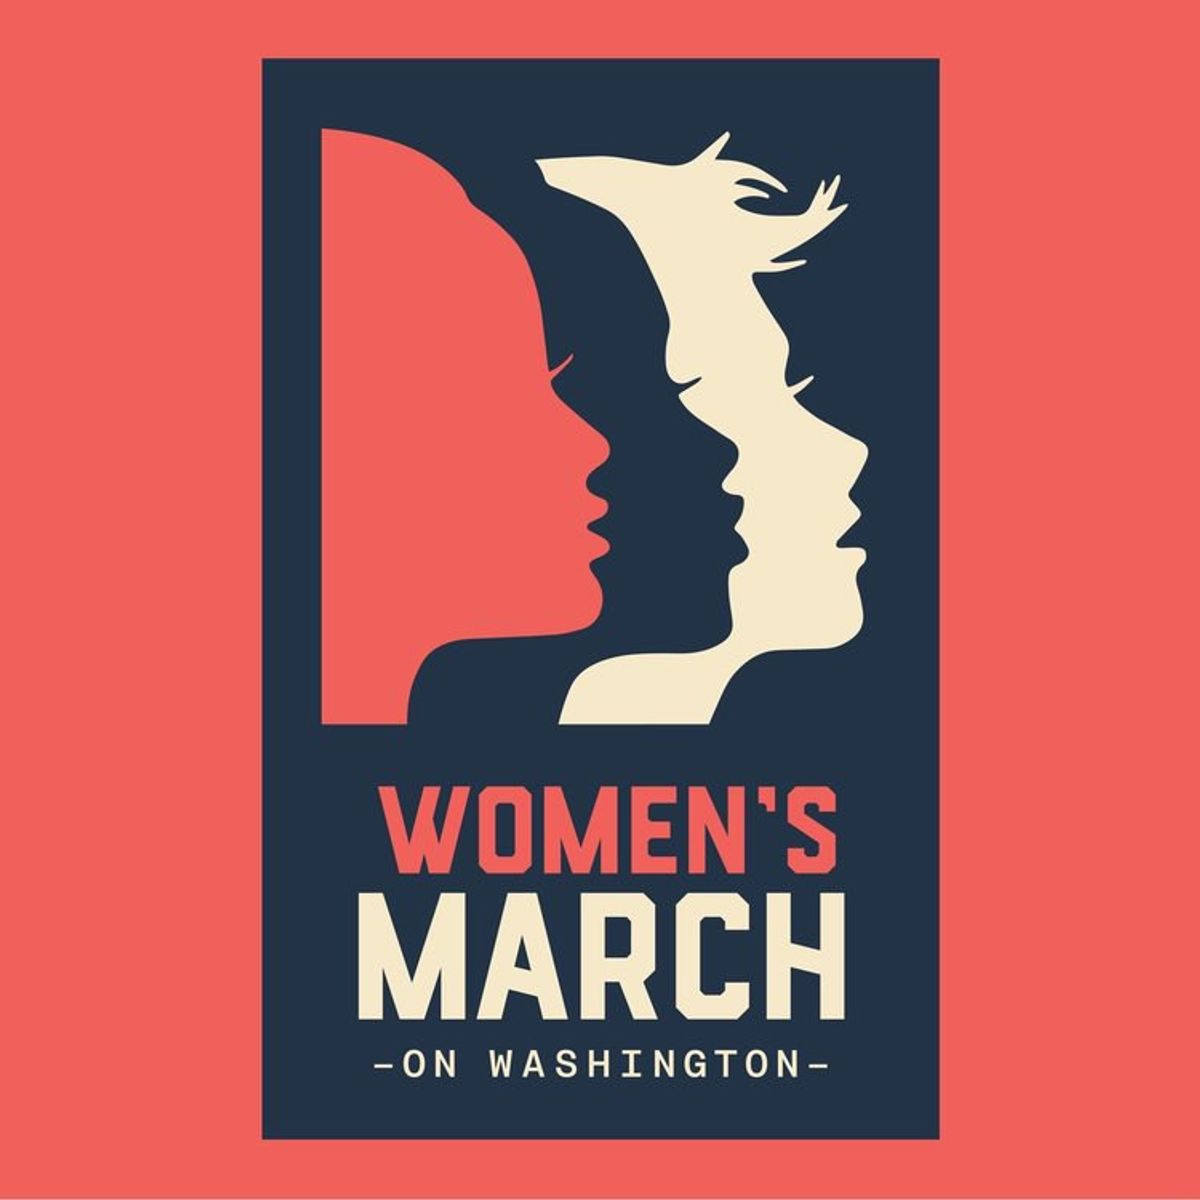 Why You Should Care About The Women's Marches